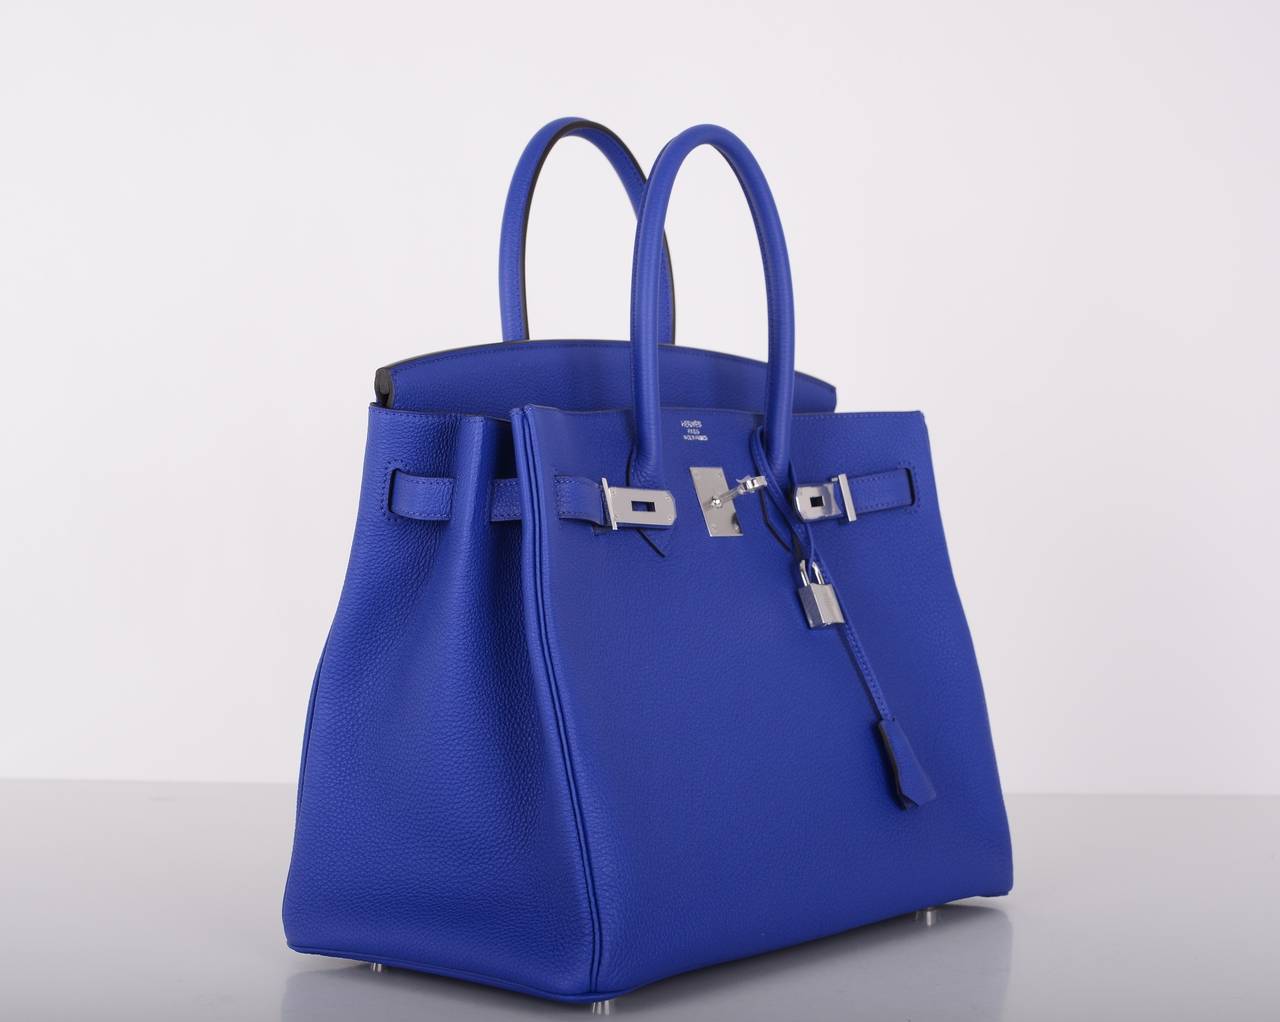 As always, another one of my fab finds! NEW INCREDIBLE Hermes BIRKIN BAG 35cm BLUE ELECTRIQUE in beautiful TOGO leather with palladium hardware.

This bag is brand new with original box and accessories.